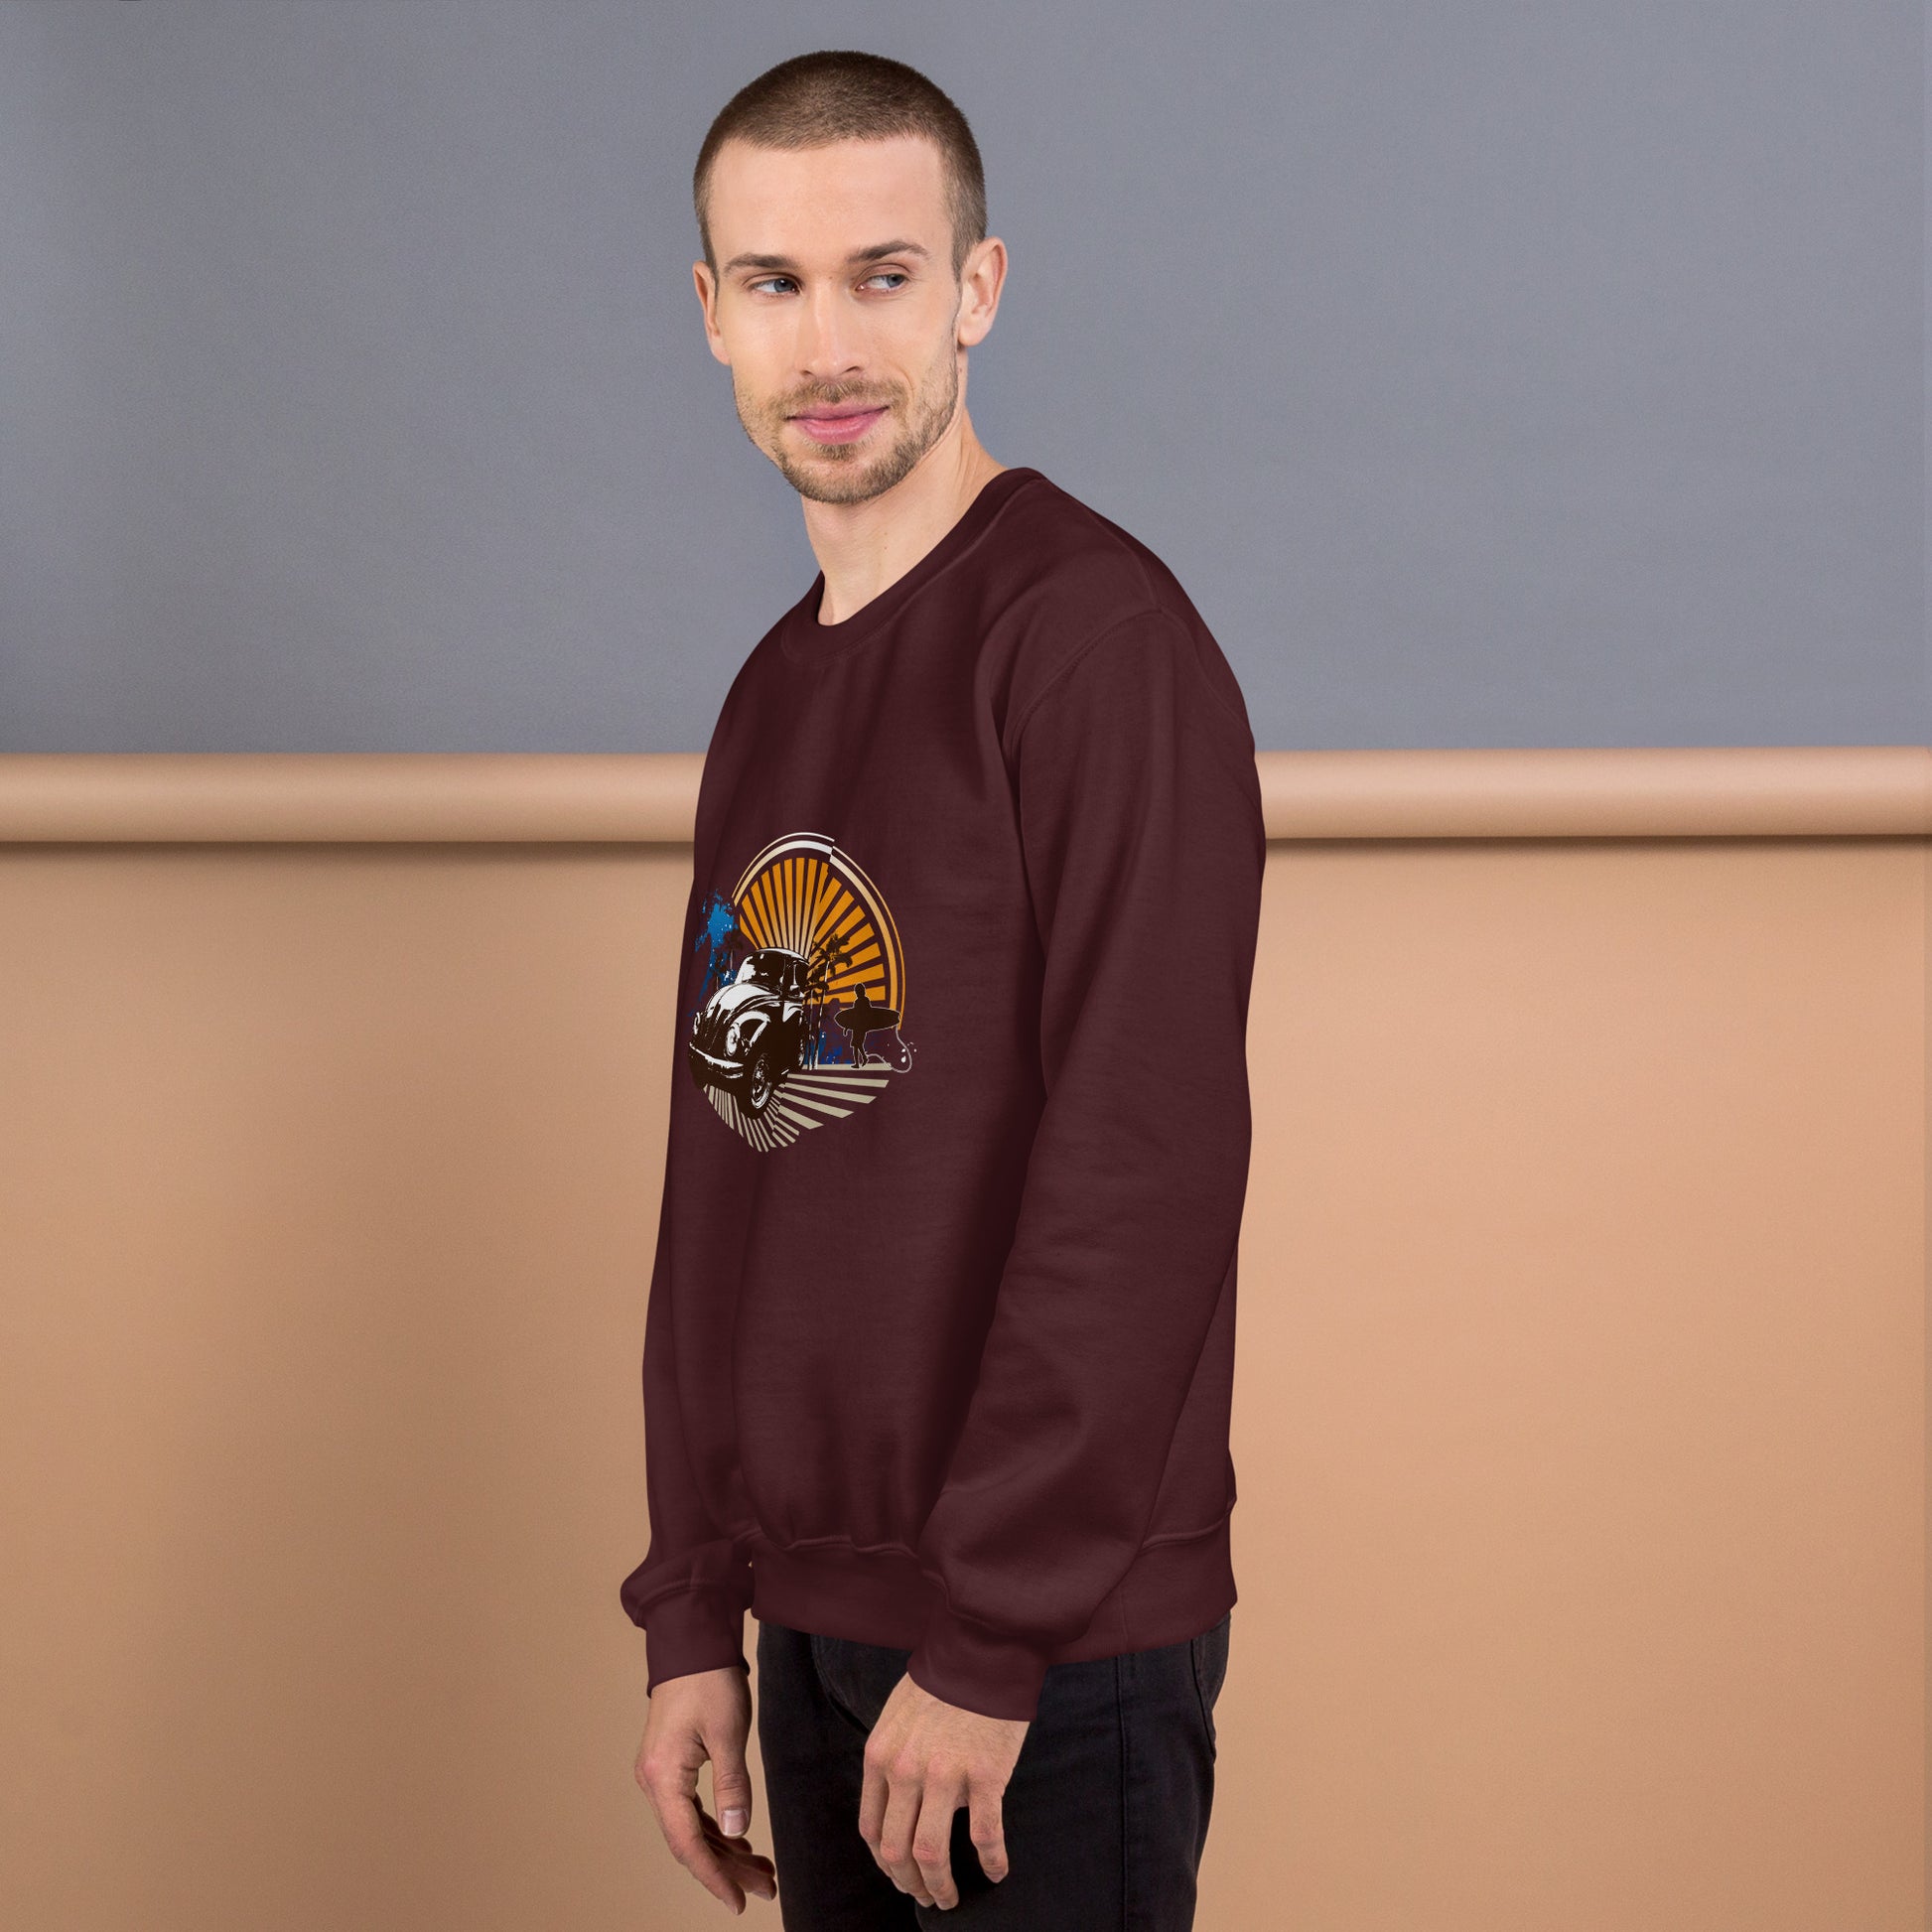 Men with maroon sweatshirt with sunset and beetle car